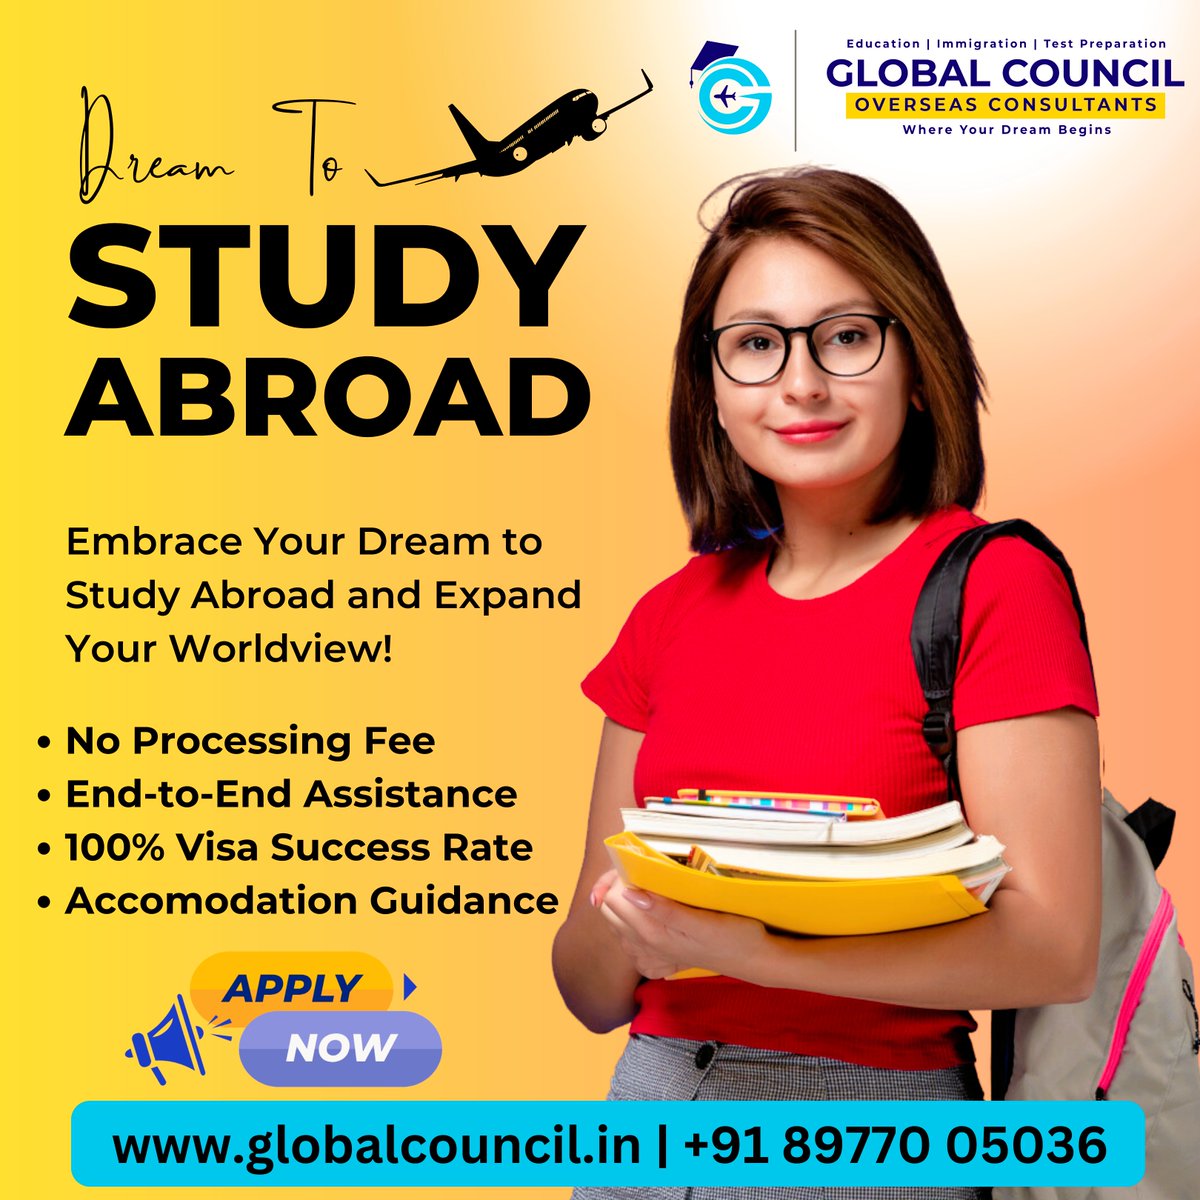 expand your world view you'll find,
Embark on a journey, enrich your learning spree,
Study abroad, the adventure awaits you.
.
.
#sudy #studyingermany #student #studyvisa #studyabroadtips #studyabroadlife #studyabroad #abroad #abroadlife #usa #ukworkvisa #germany